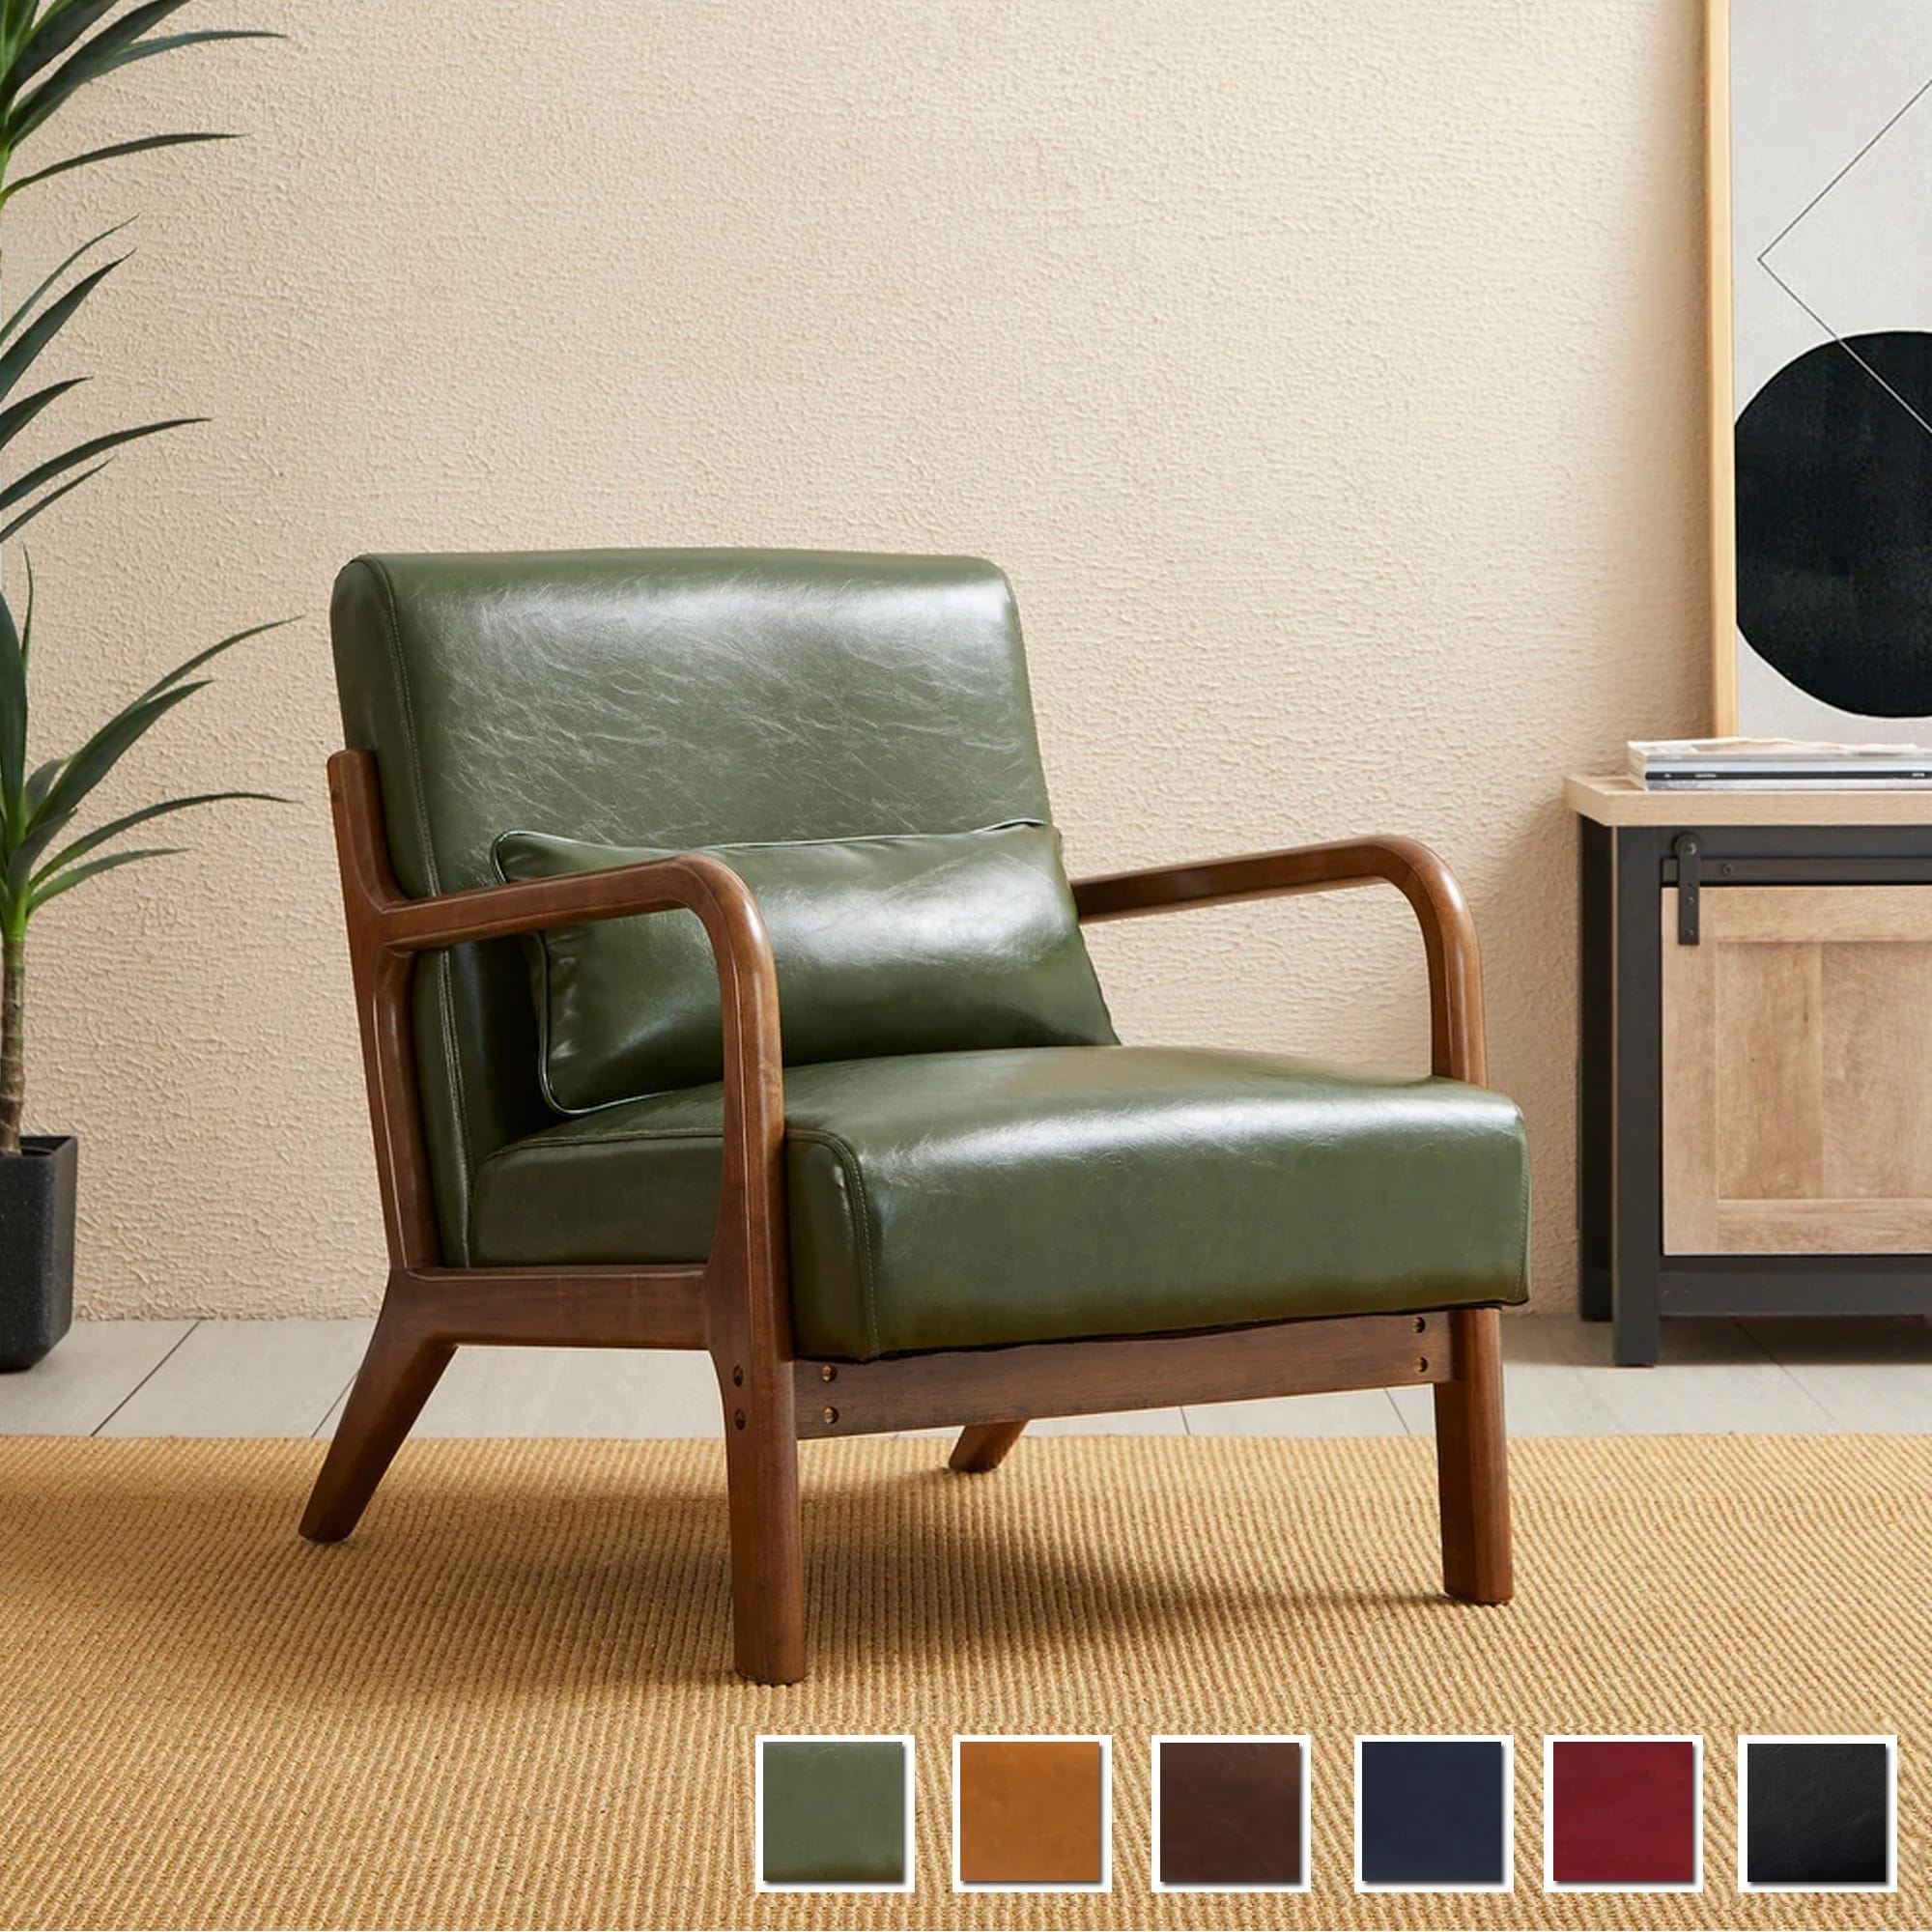 Glitzhome 30.75"H Mid-Century Modern PU Leather Armchair Accent Chair with Pillow